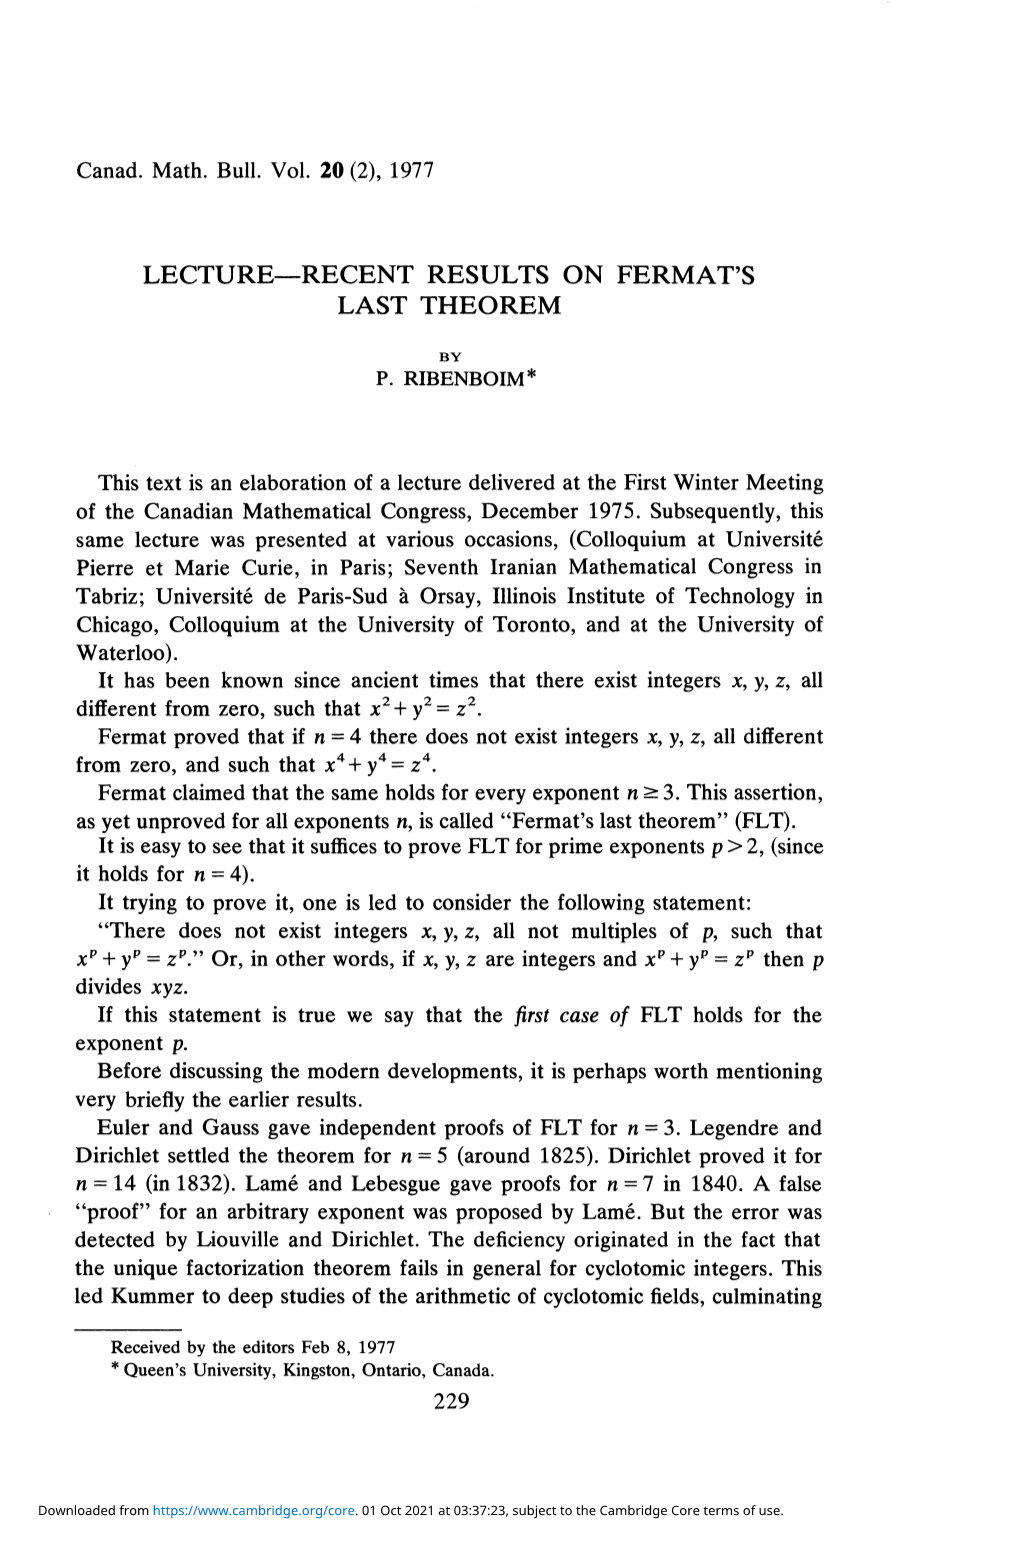 Lecture—Recent Results on Fermat's Last Theorem